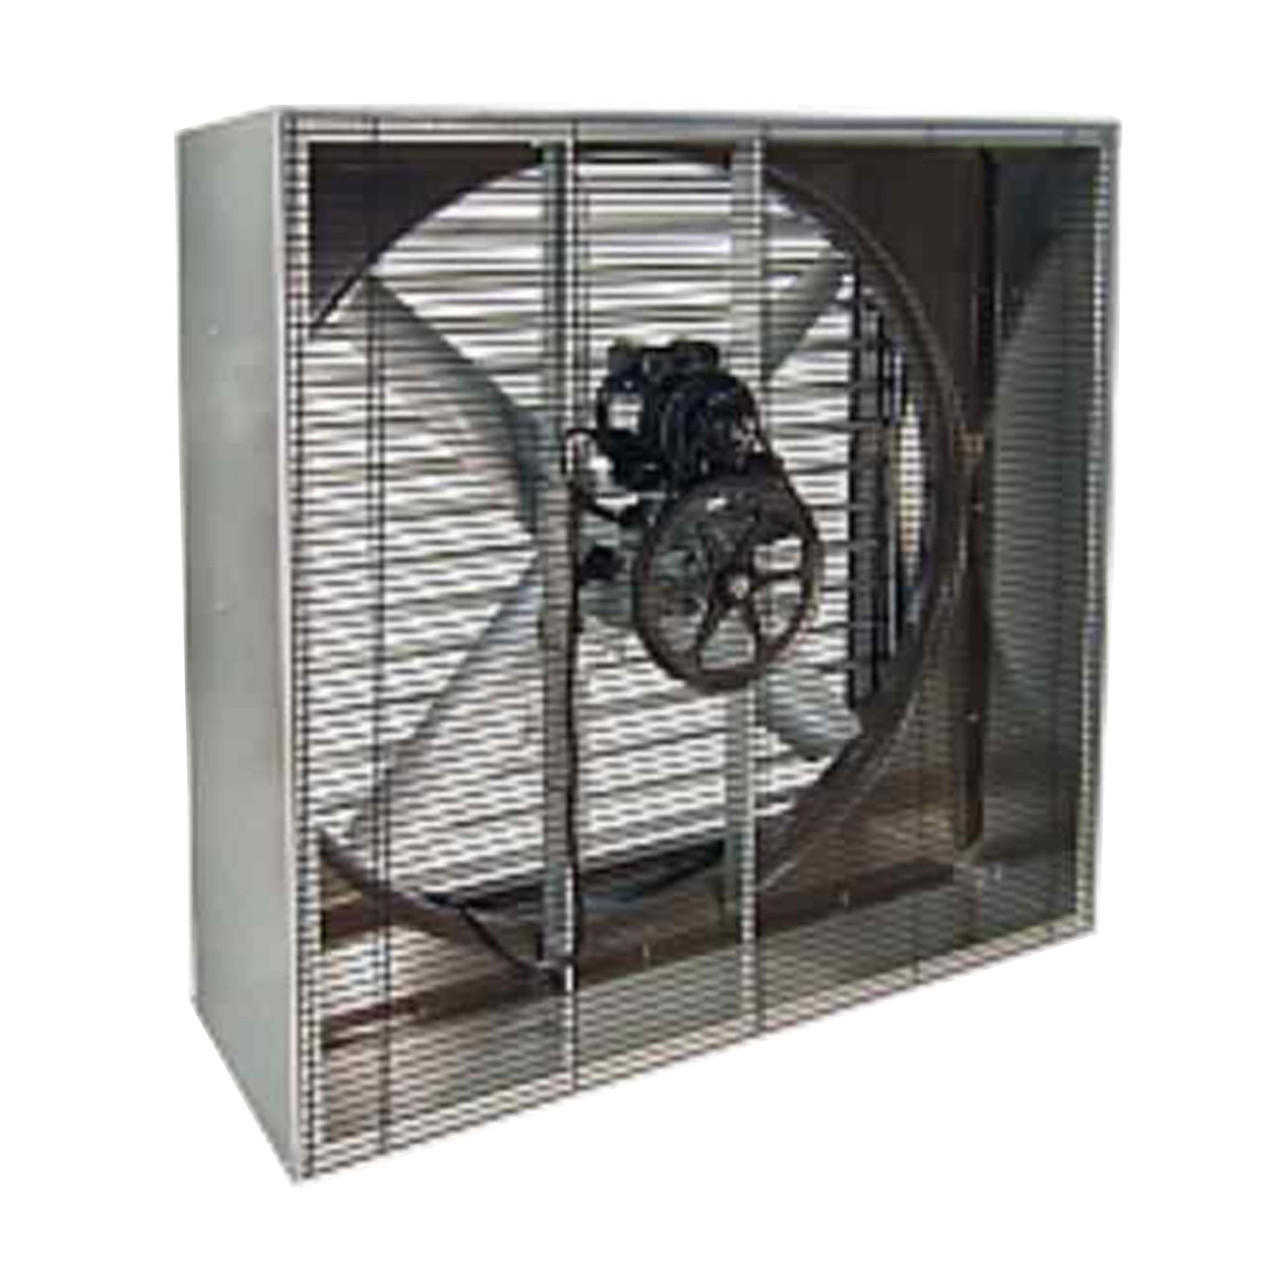 VIK2413-X Triangle Fans 24" 1 Speed 1/2 HP 230/460V 3-Phase Open Drip Proof Motor Belt Drive Industrial Exhaust Fan with Shutter and Guard